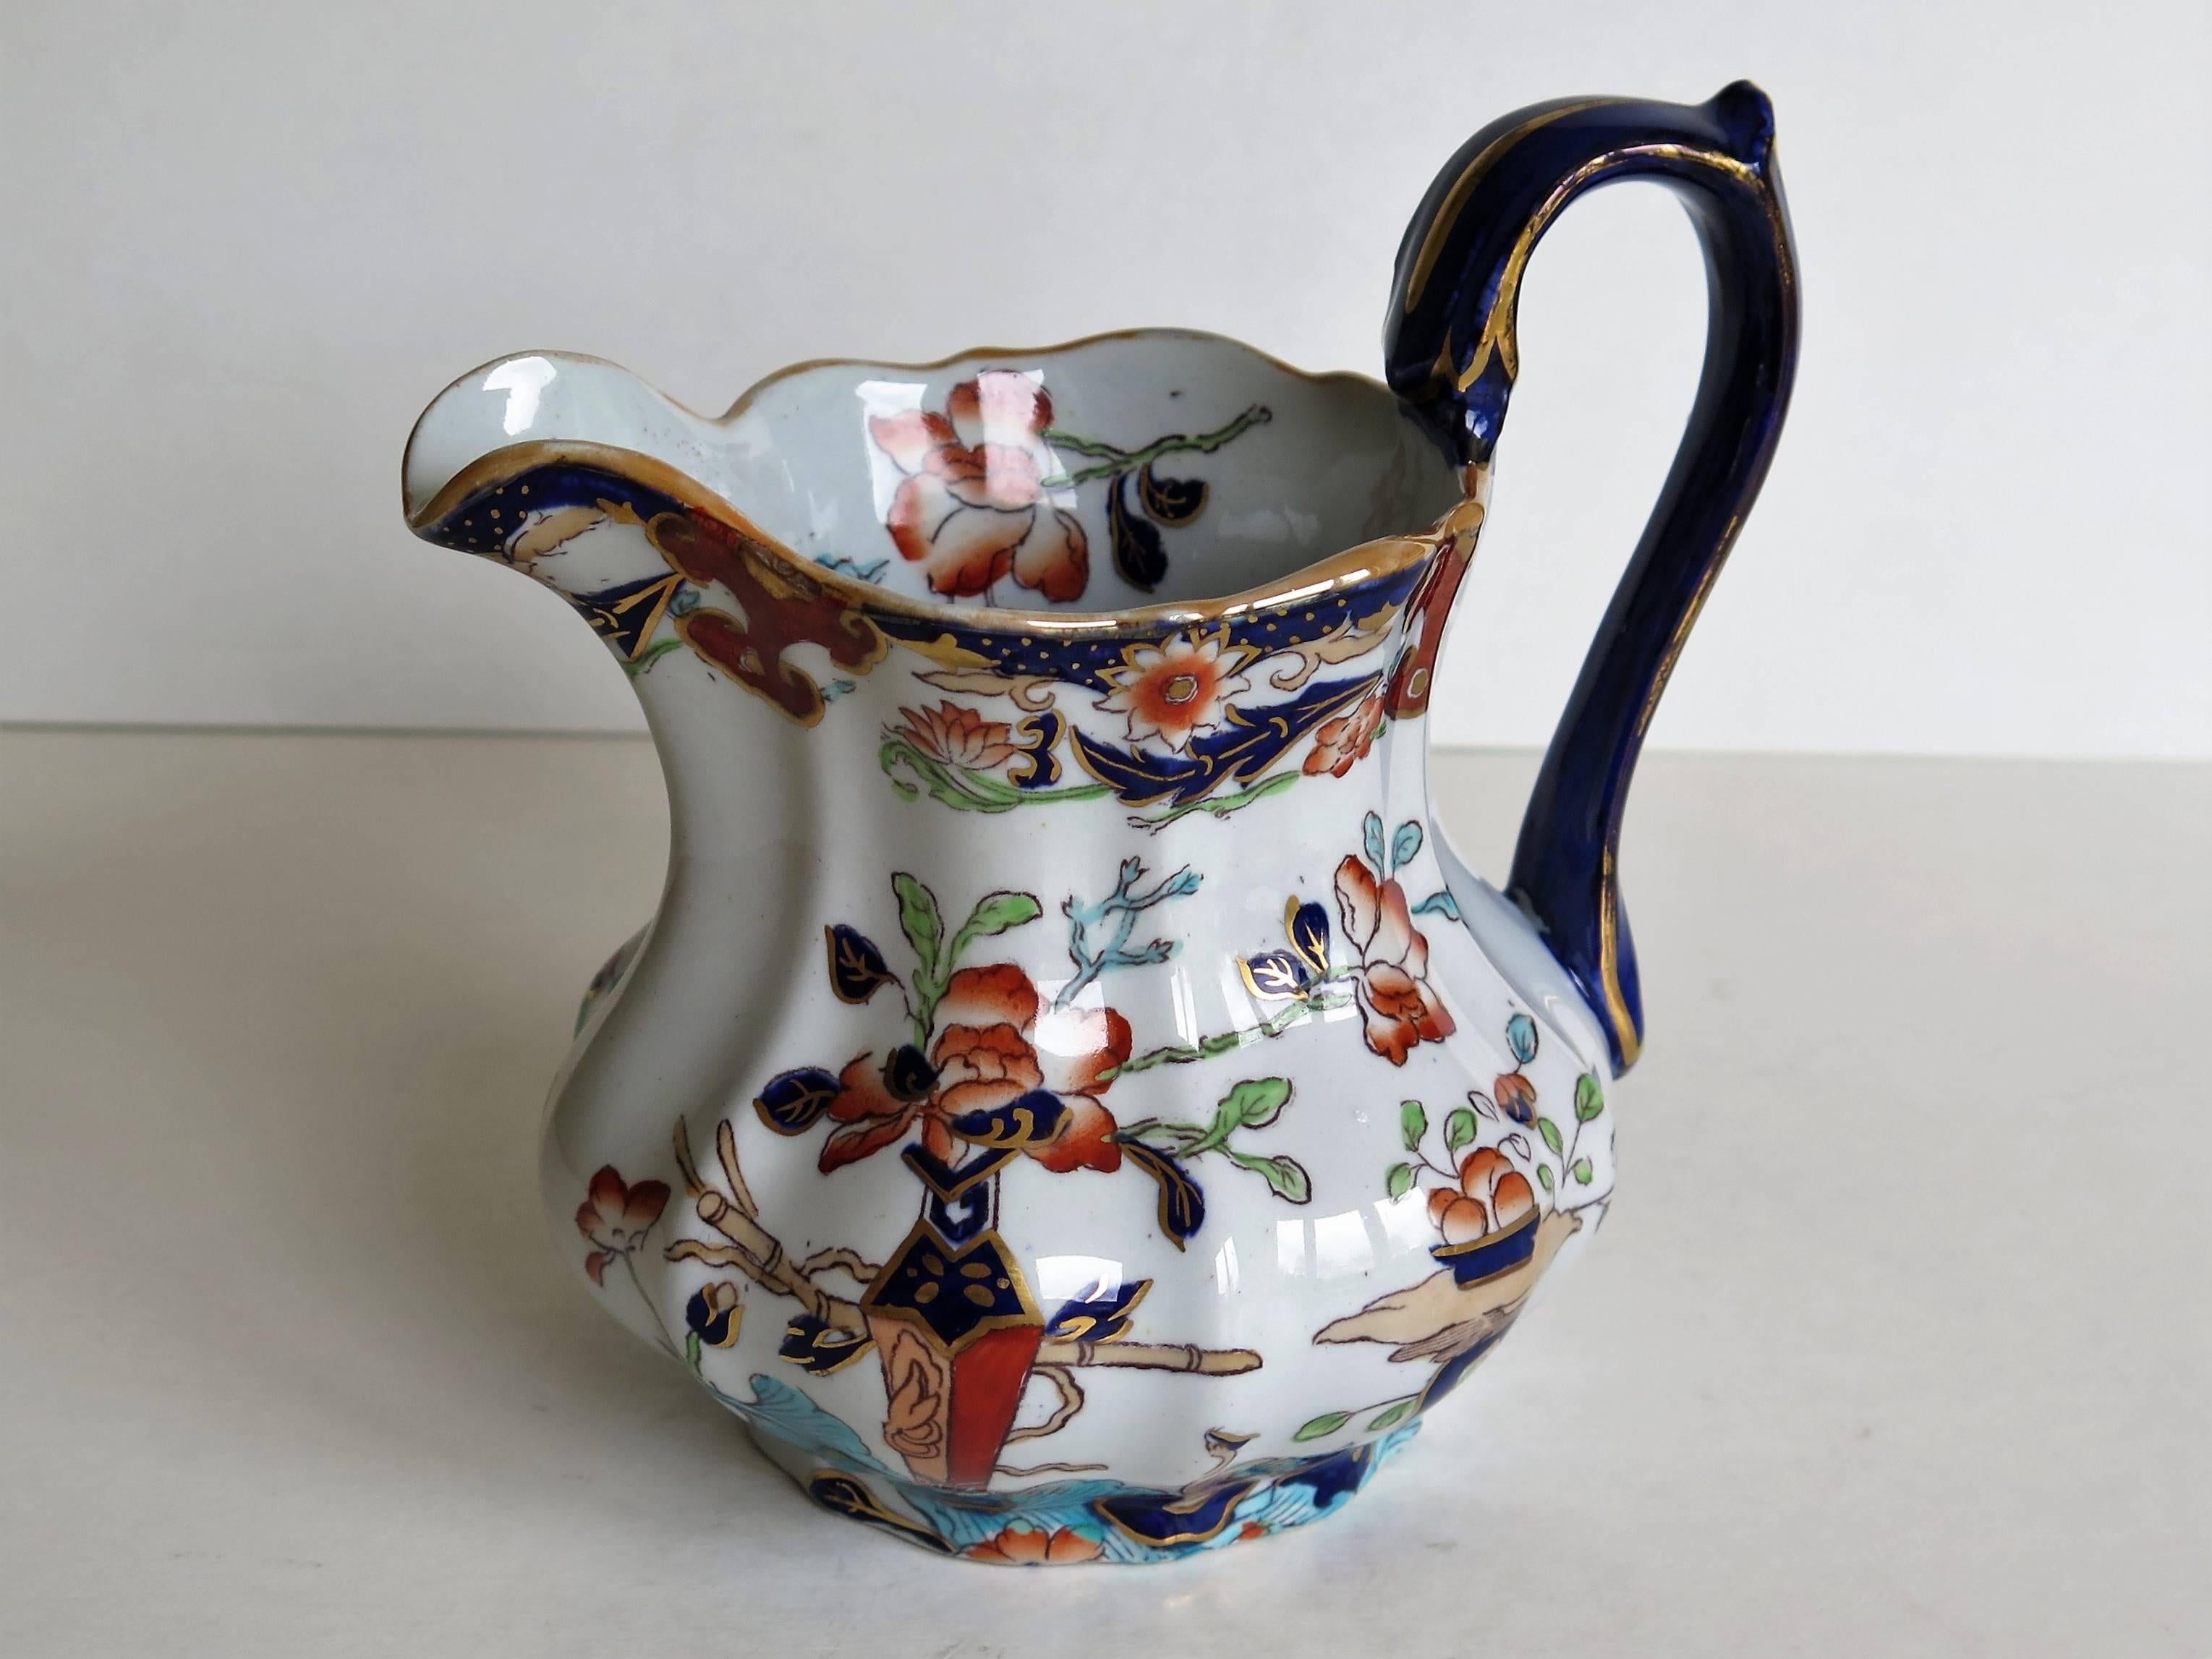 This is a very good jug or pitcher by Mason's Ironstone, England, circa 1890.

The jug has a bulbous fluted form in a shape that is not often seen and with a high loop handle having a thumb spur. 

This jug has one of the very decorative